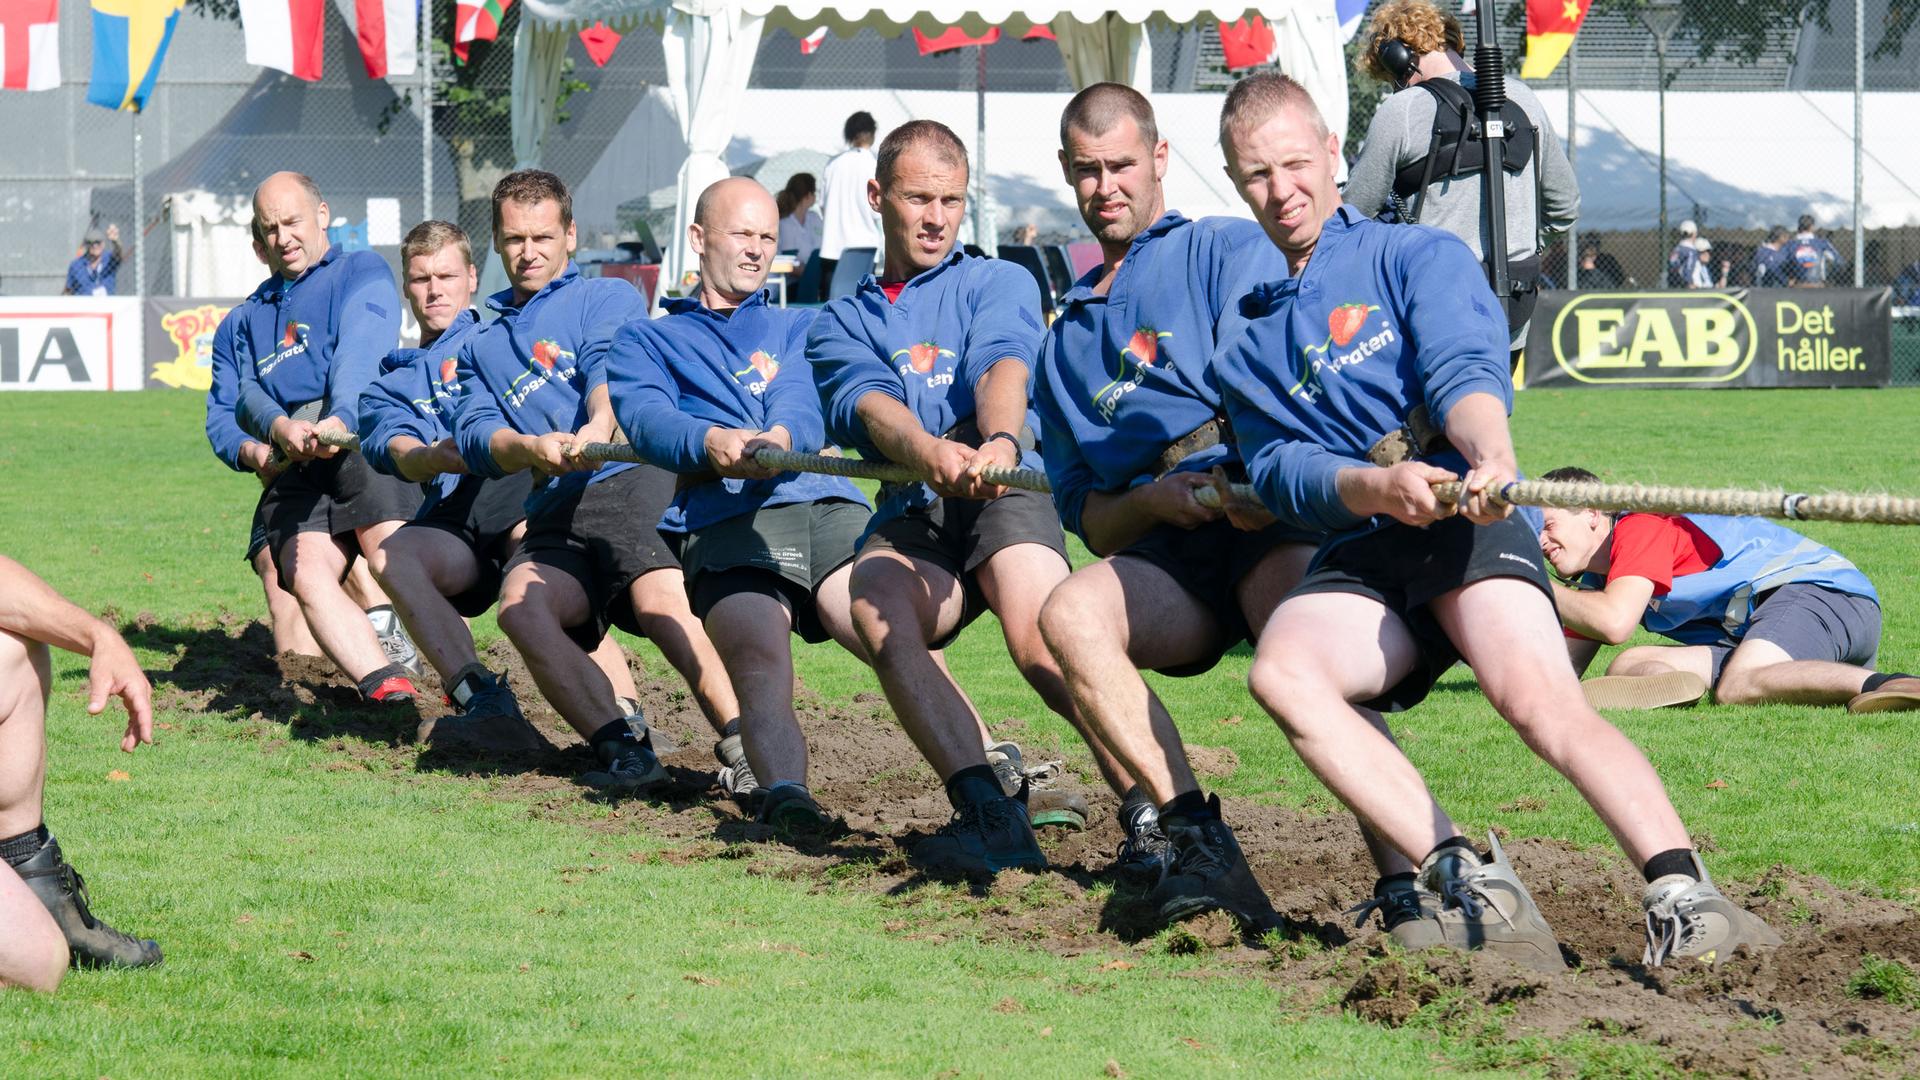 The Belgian men's team wears blue shirts during a tug of war competition. 